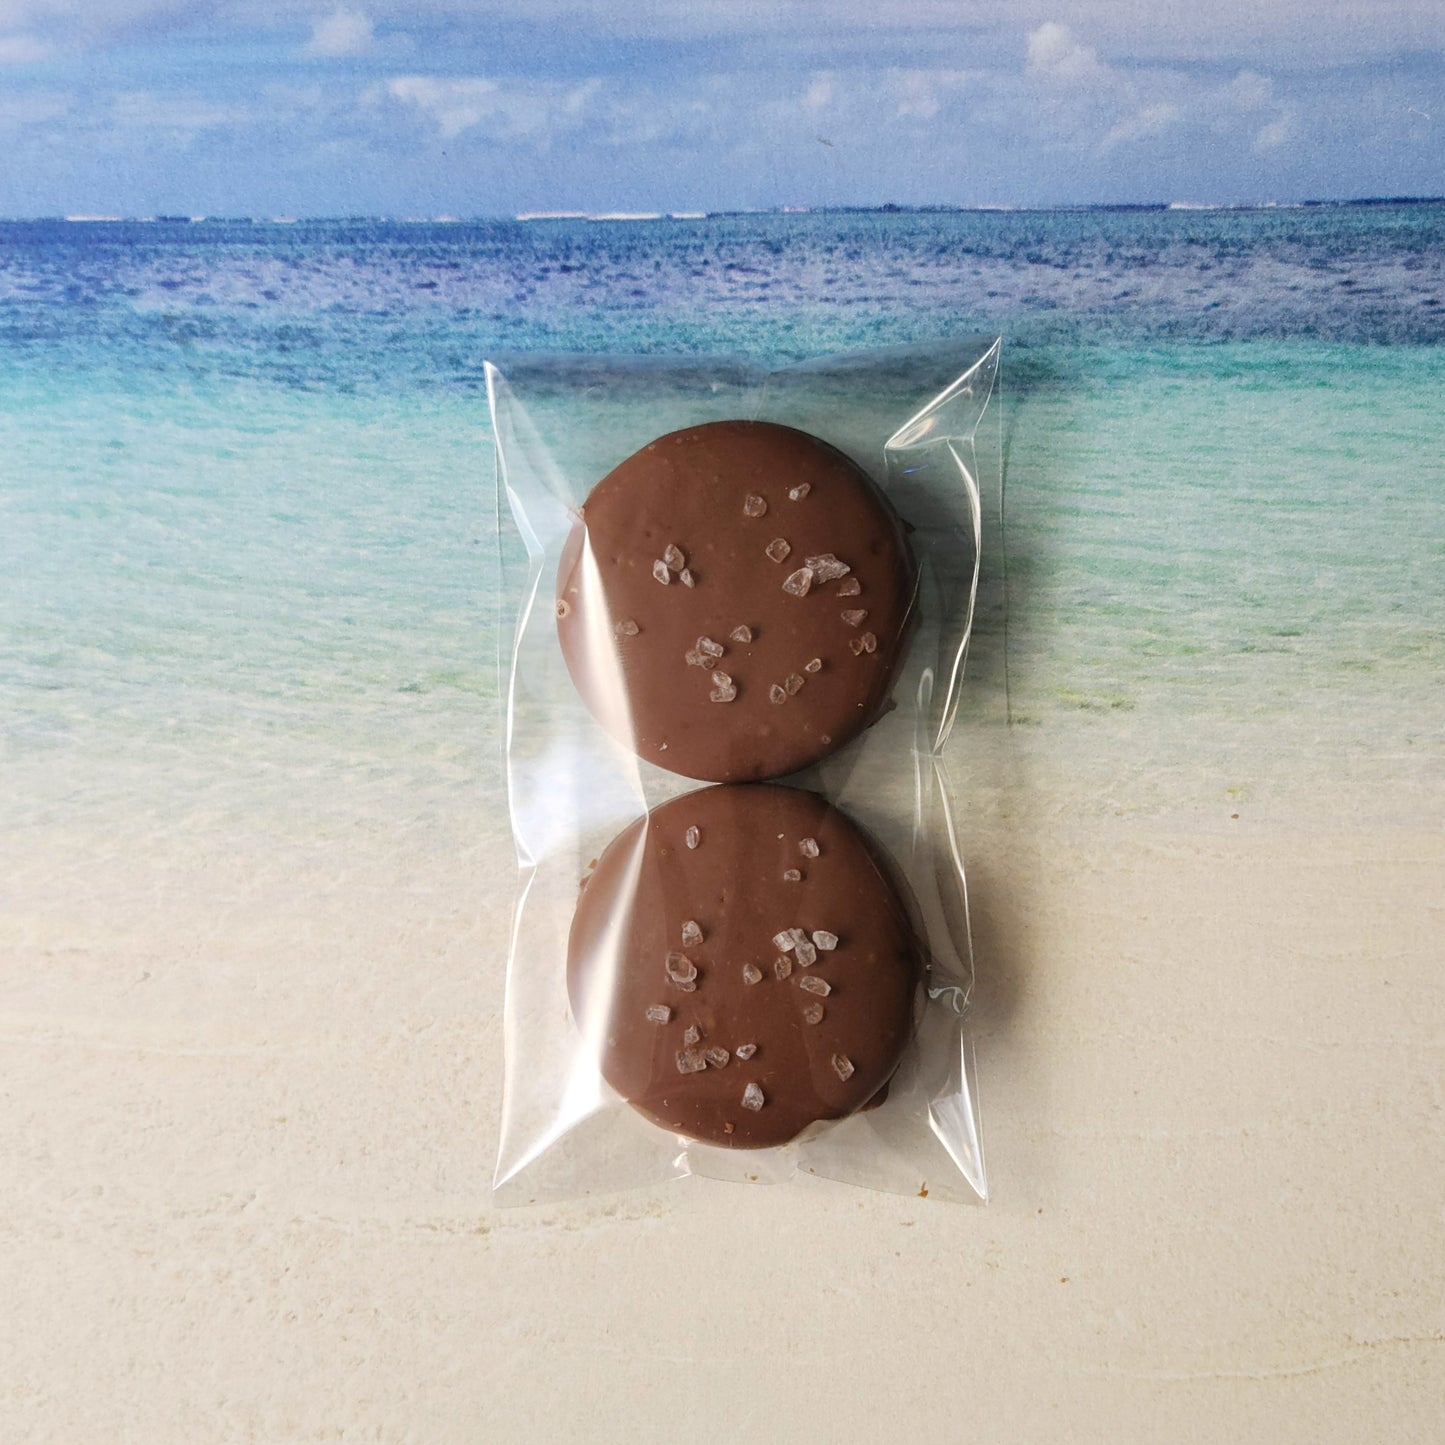 Salty meets sweet with our chocolate covered oreo cookies topped with sea salt.